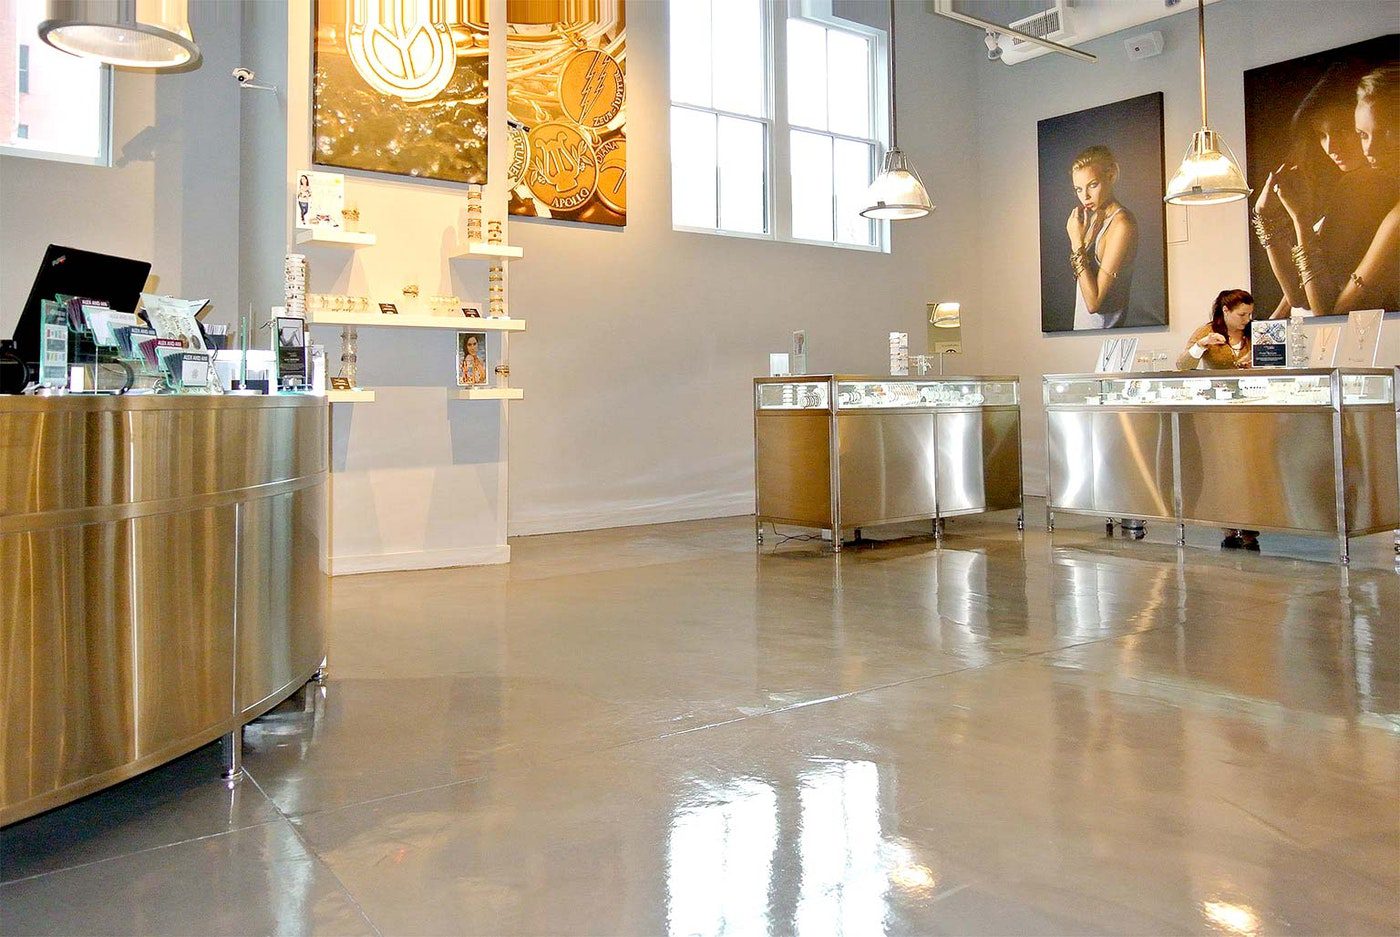 A detailed close up of a glossy polished concrete floor featuring intricate patterns in shades of gray and white The High end Jewelry Retailer Alex and Ani Gets a Polished Concrete Floor for Their Flagship Store | Duraamen Engineered Products Inc